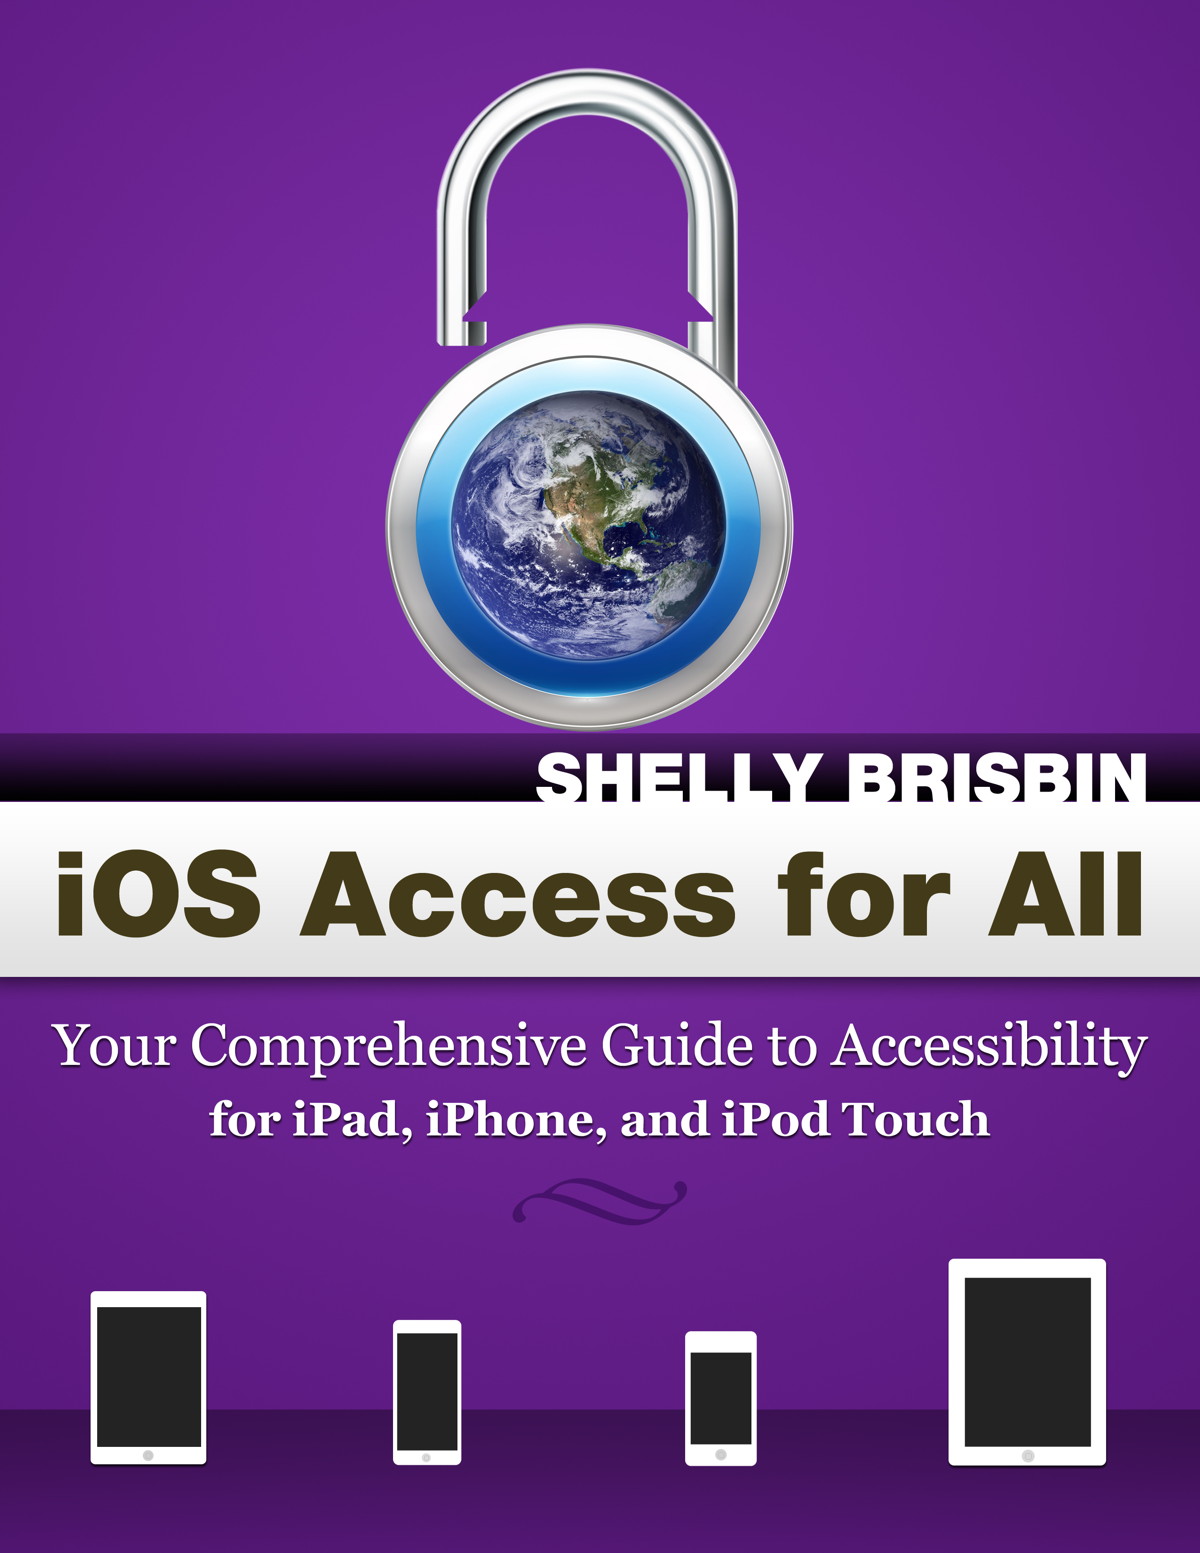 iOS Access for All: Your Comprehensive Guide to Accessibility For iPad, iPhone, and iPod Touch. By Shelly Brisbin